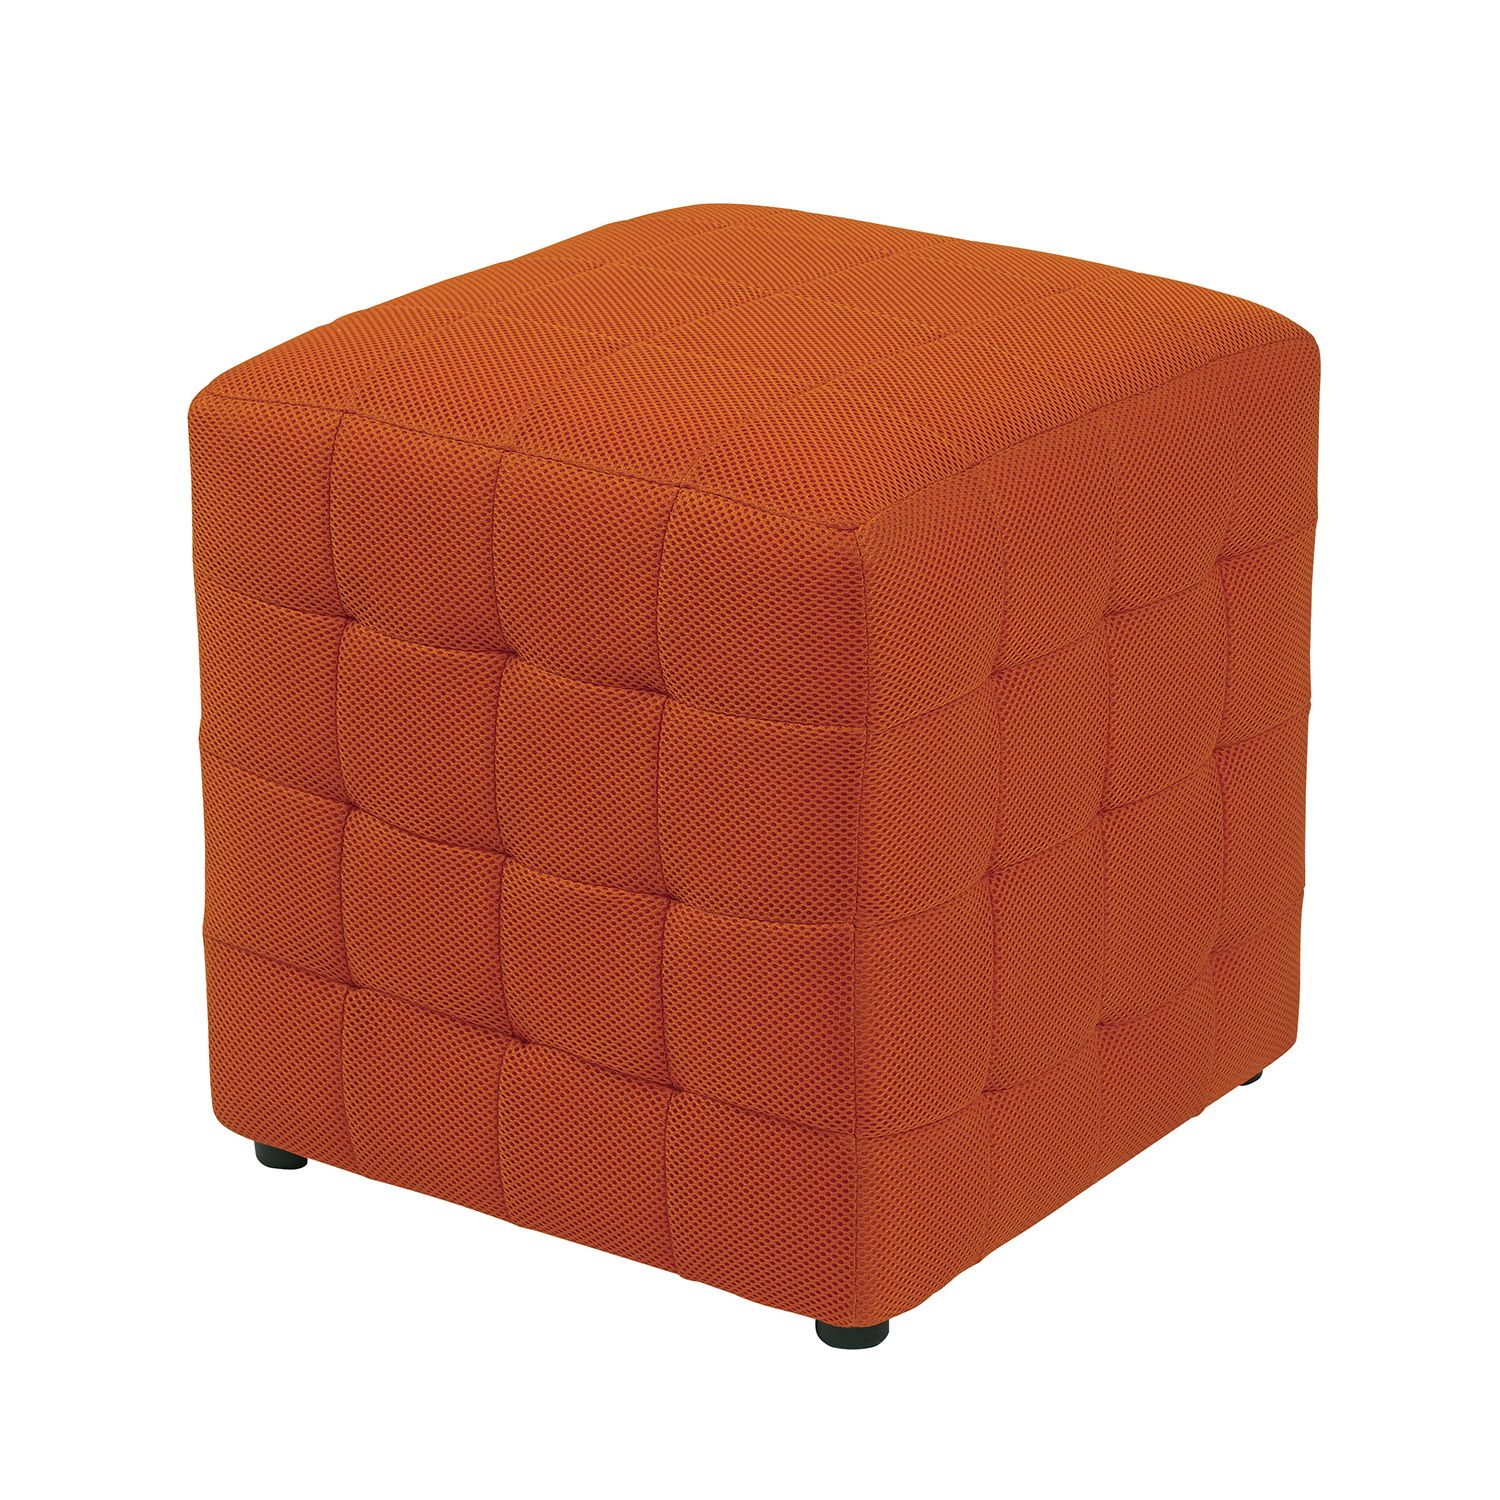 Solid Cuboid Pouf Ottomans Pertaining To Latest 15" Cube Ottoman – Pier (View 6 of 10)